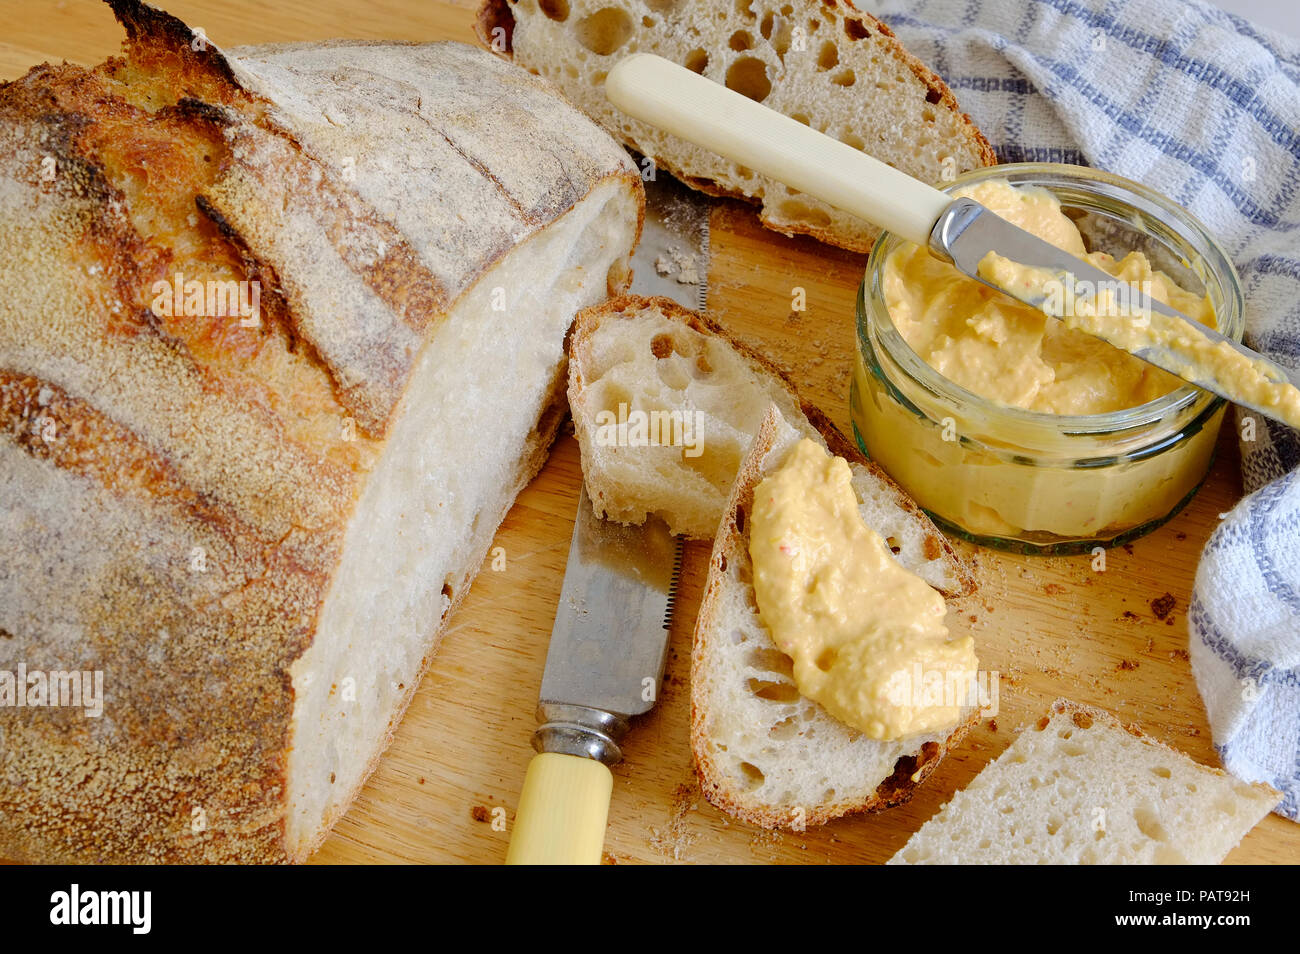 rustic sourdough bread and sweet chilli houmous Stock Photo